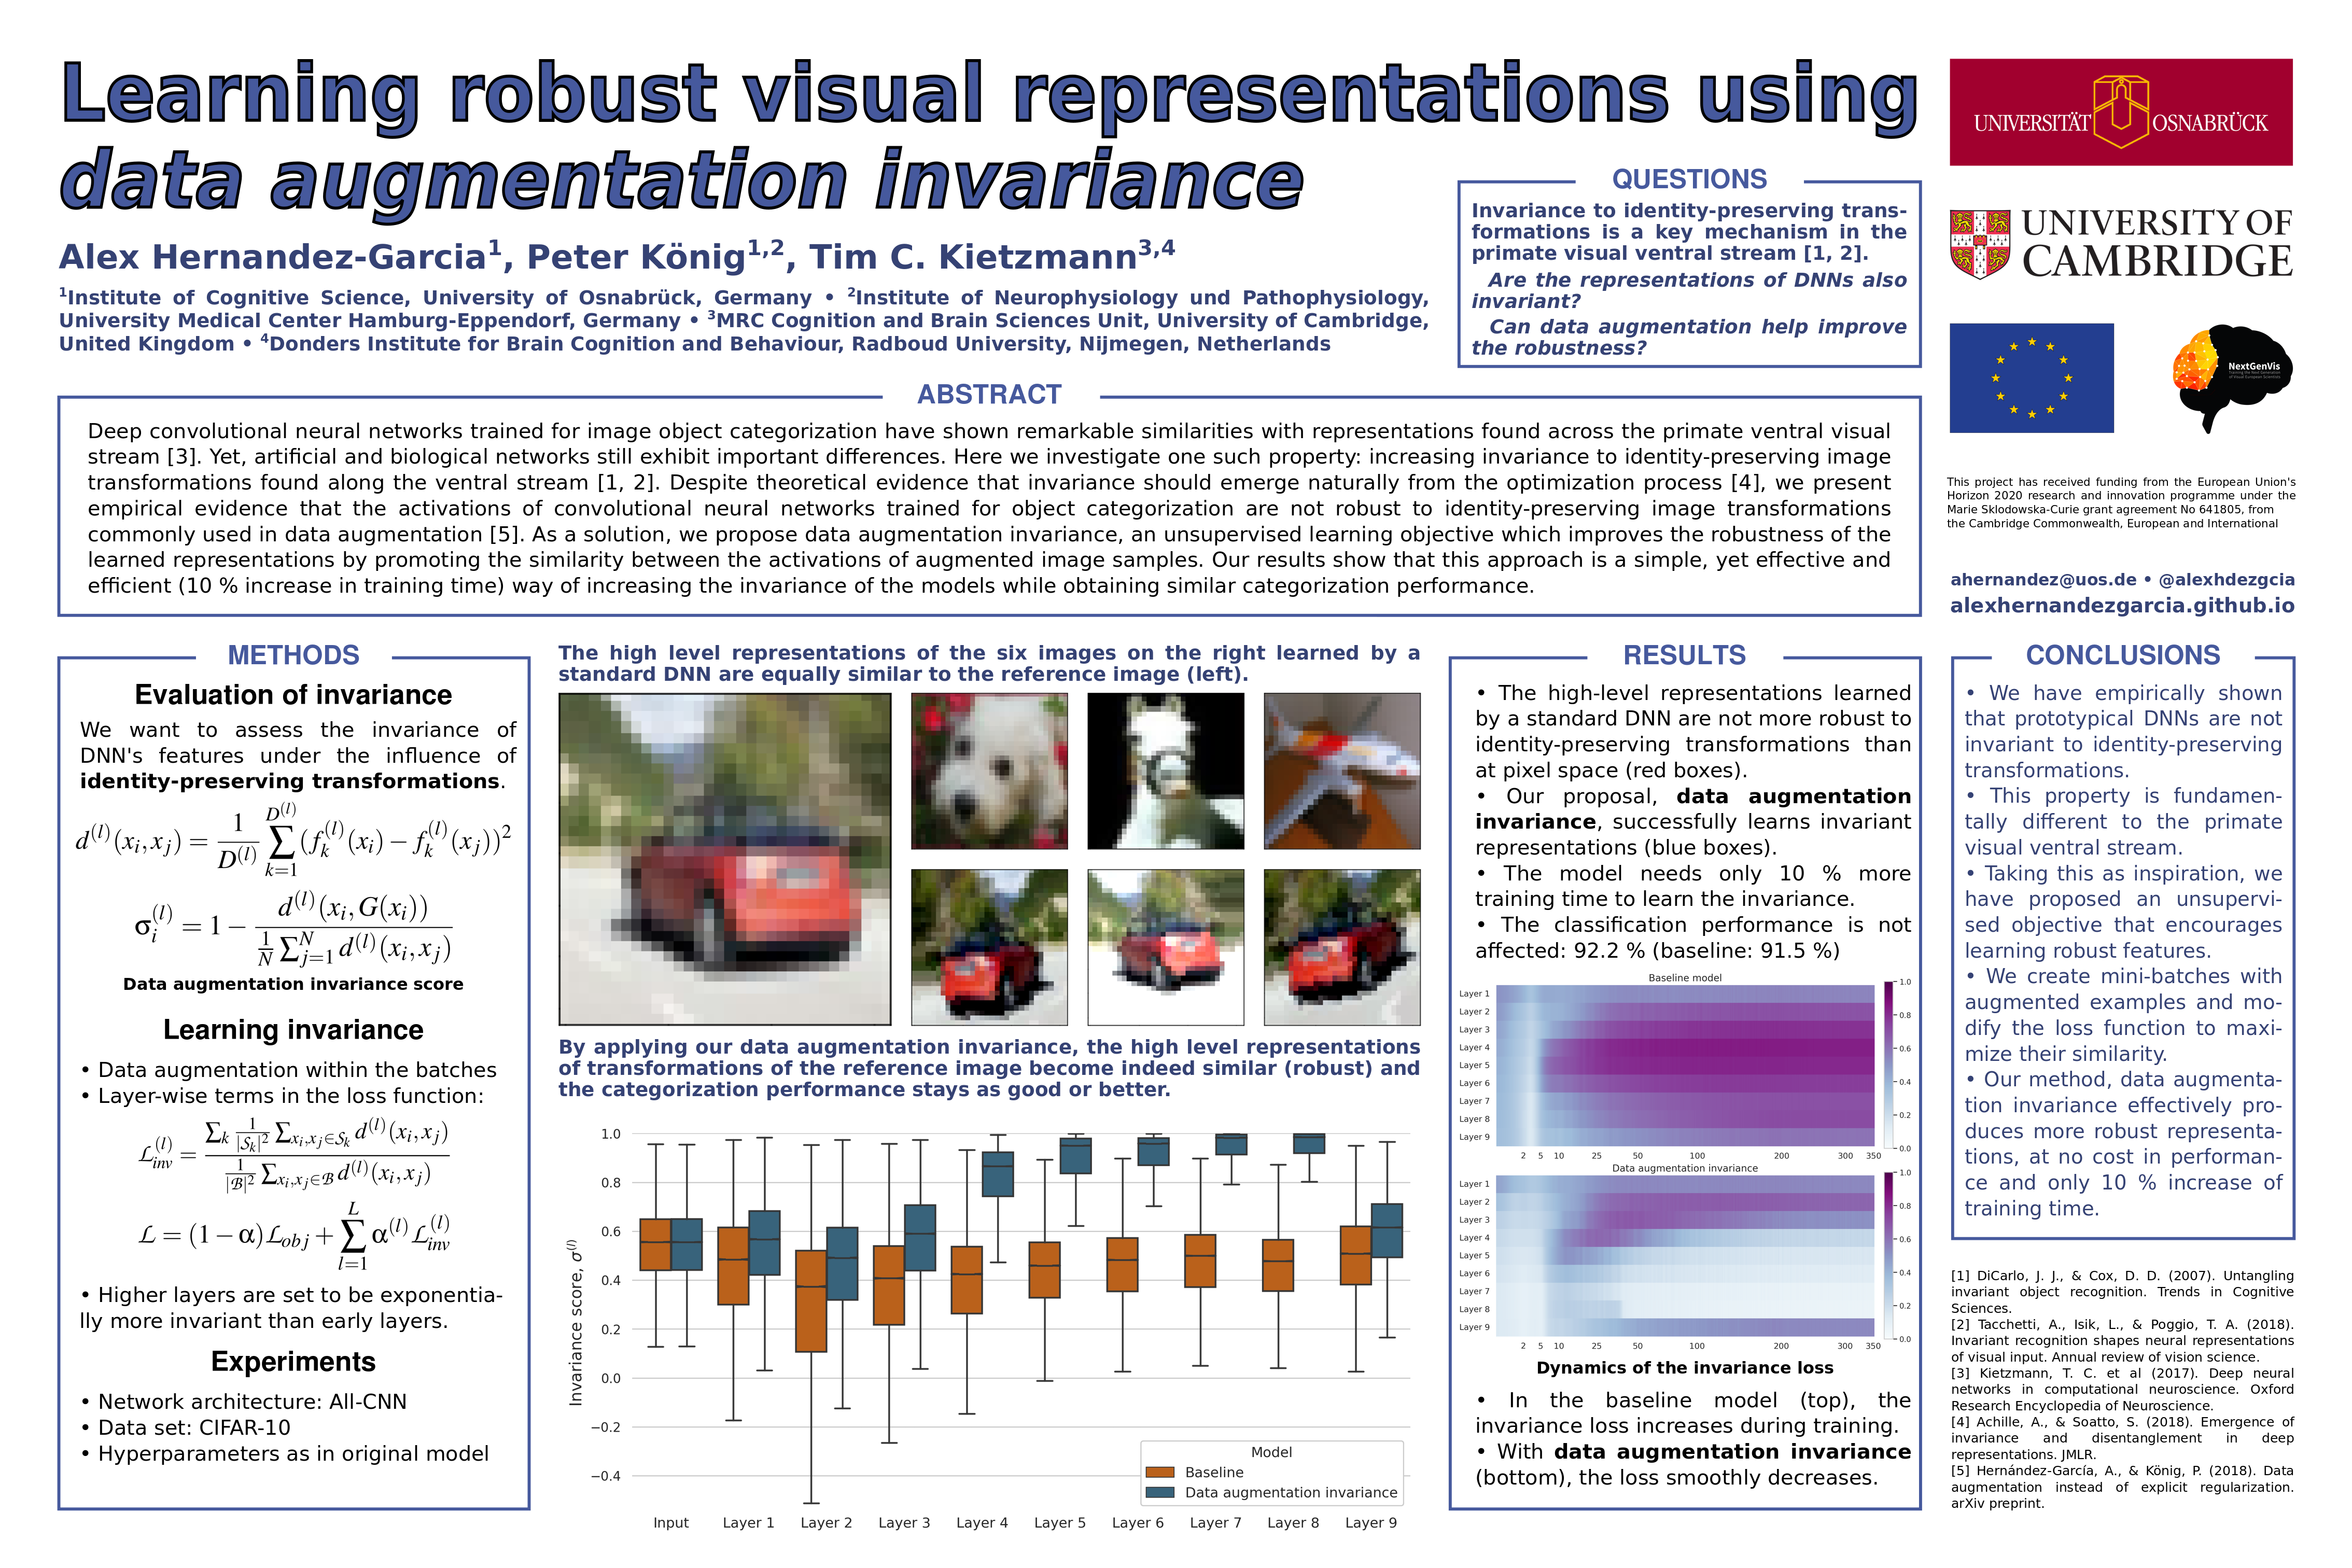 Learning robust visual representations with data augmentation invariance